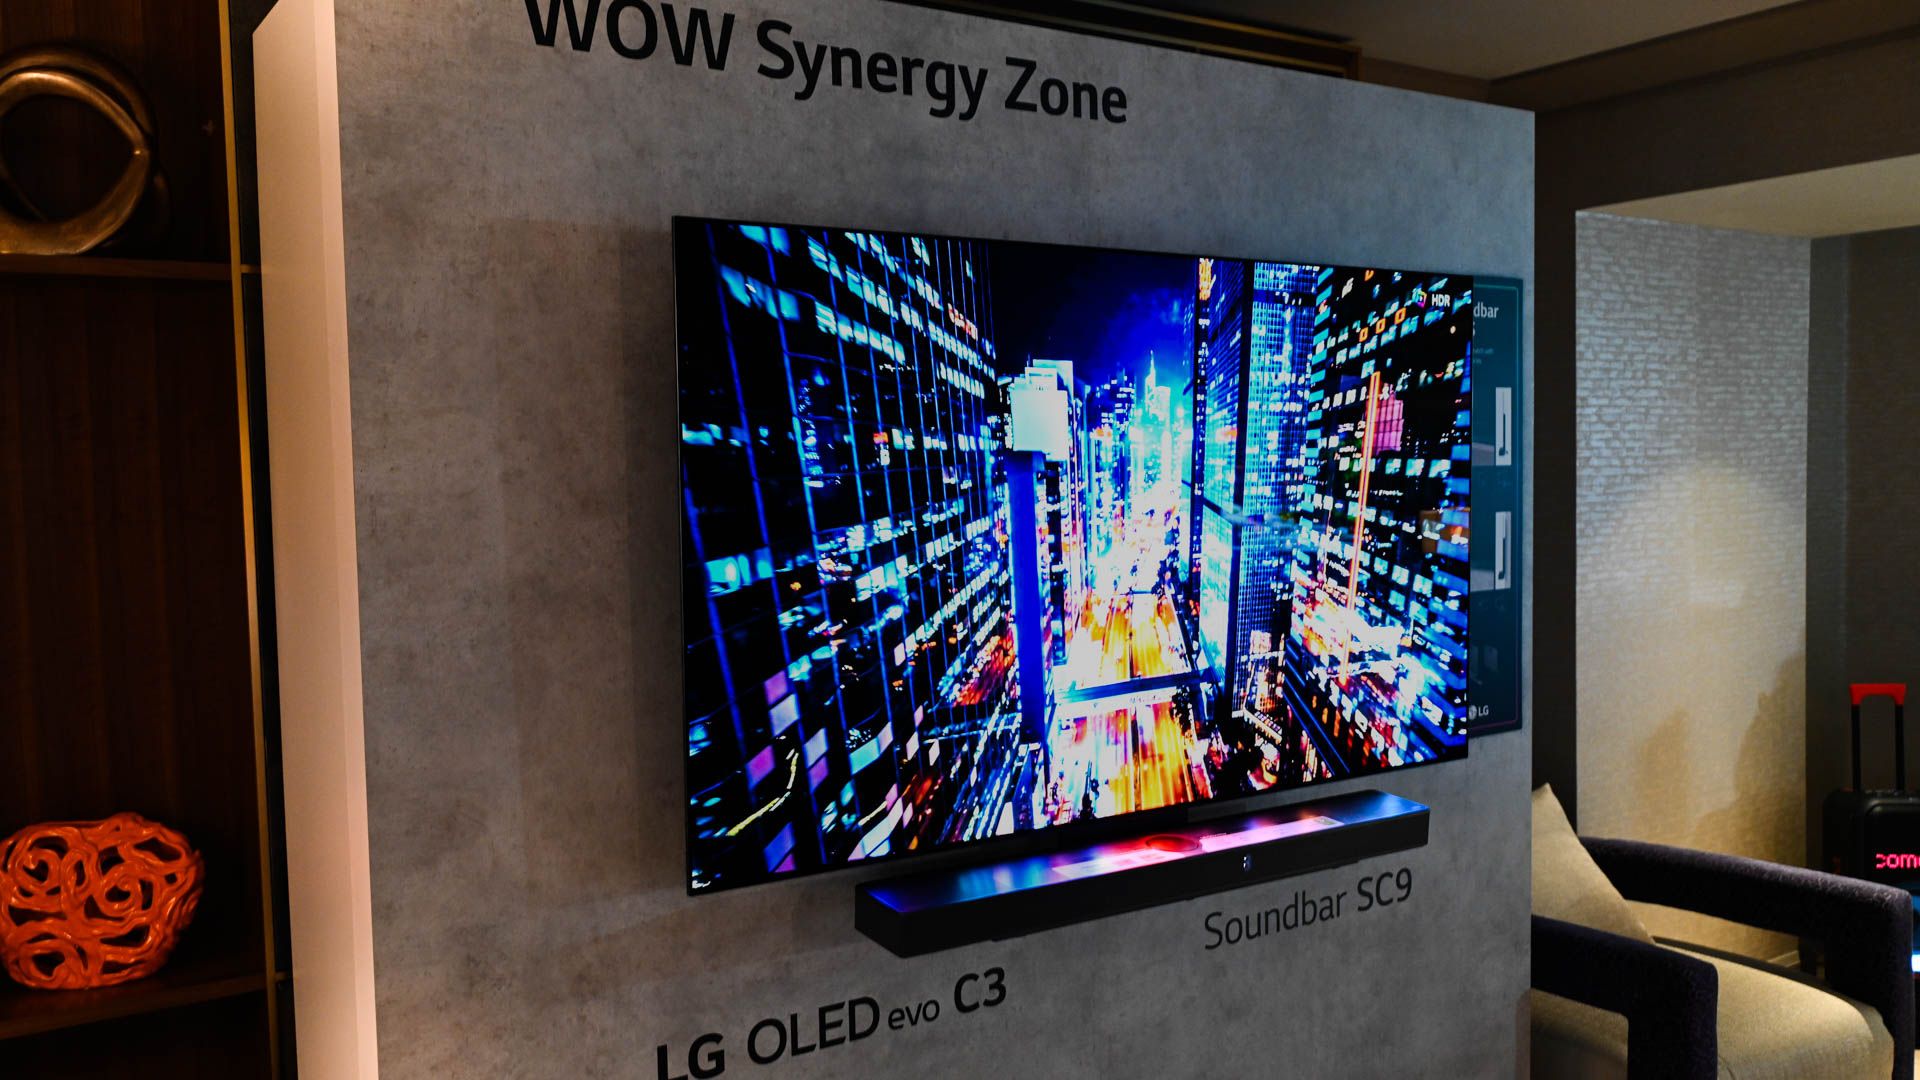 WOW Synergy Zone demonstrated with an LG OLED evo c3 attached Soundbar SC9